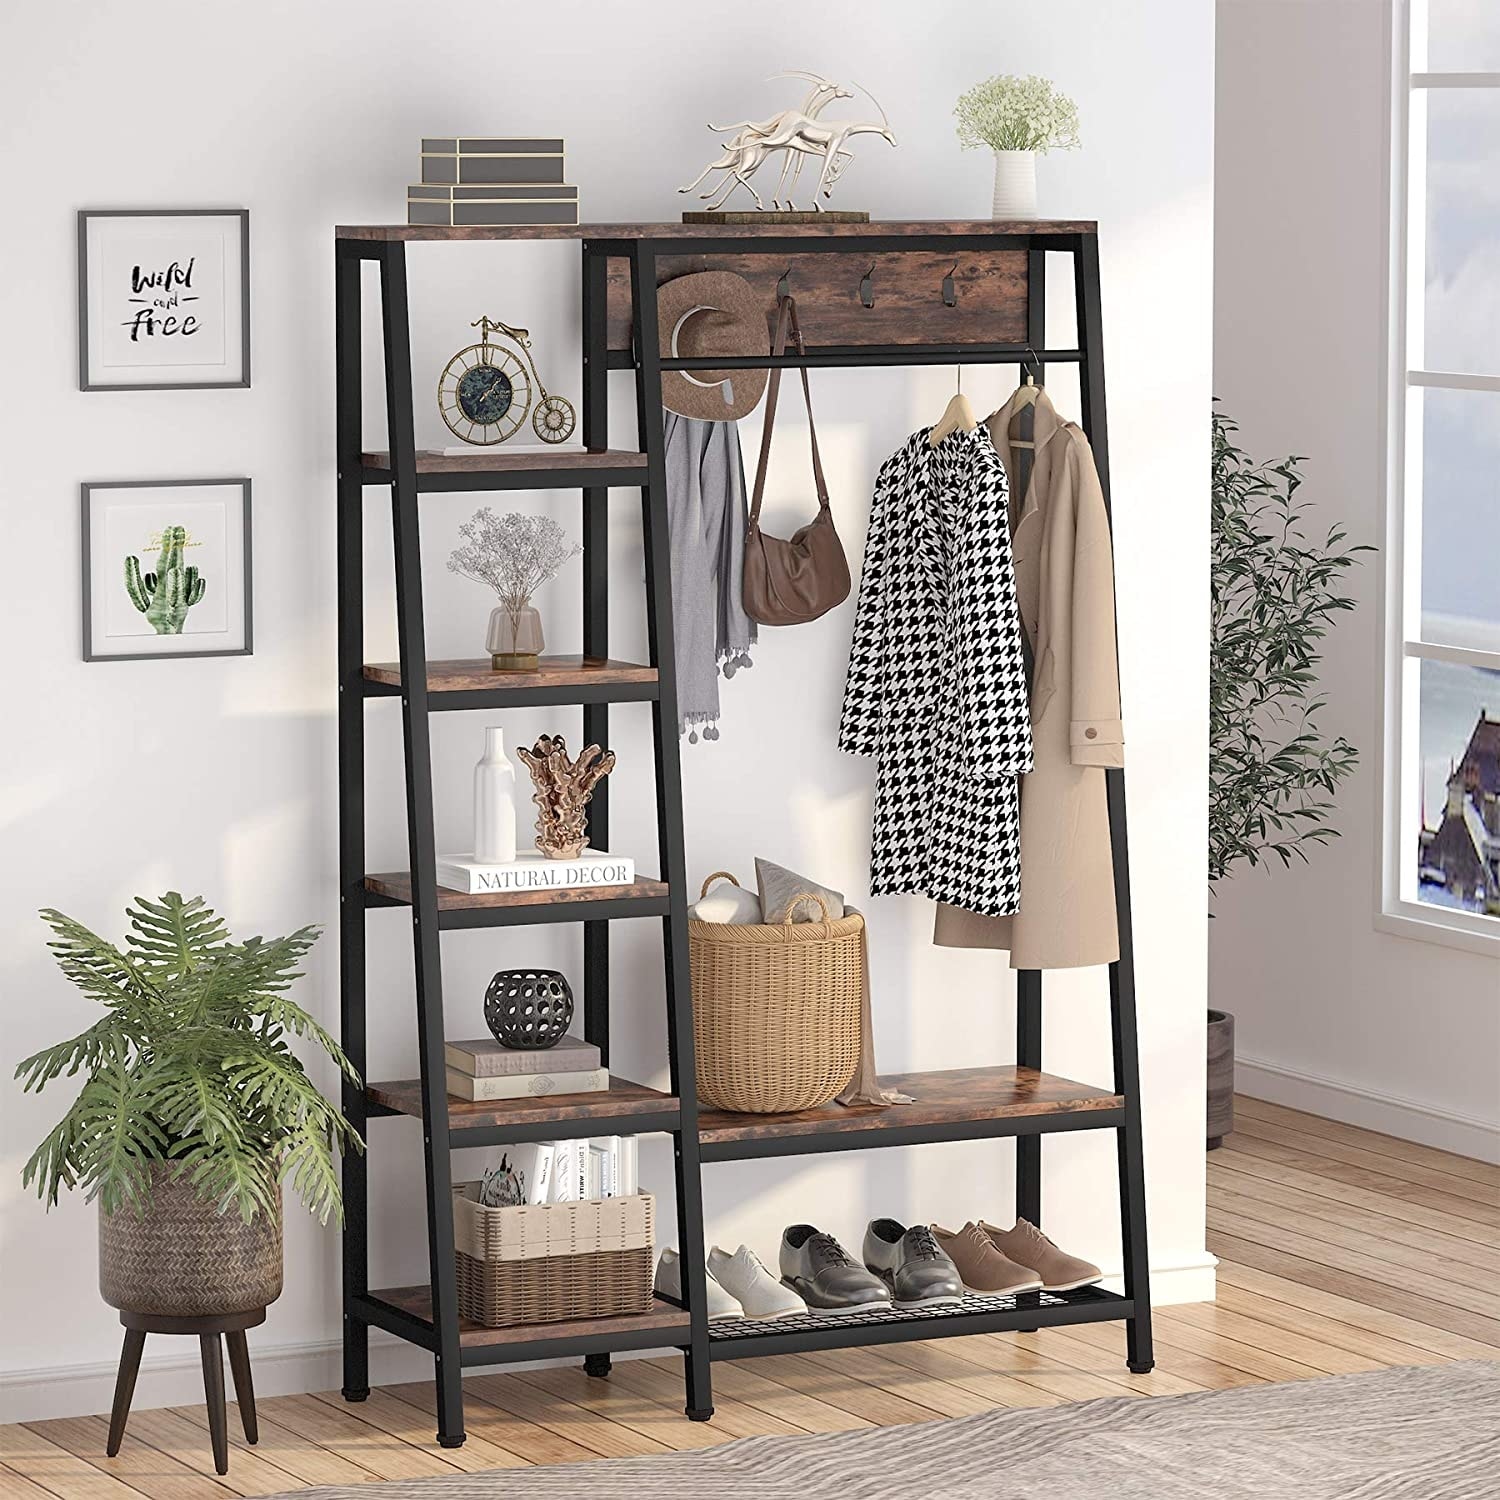 Coat Rack Freestanding Closet Organizer Clothes Garments Storasge Shelf for Hallway Tribesigns Entryway Hall Trees with Hooks and Shoes Bench Bedroom